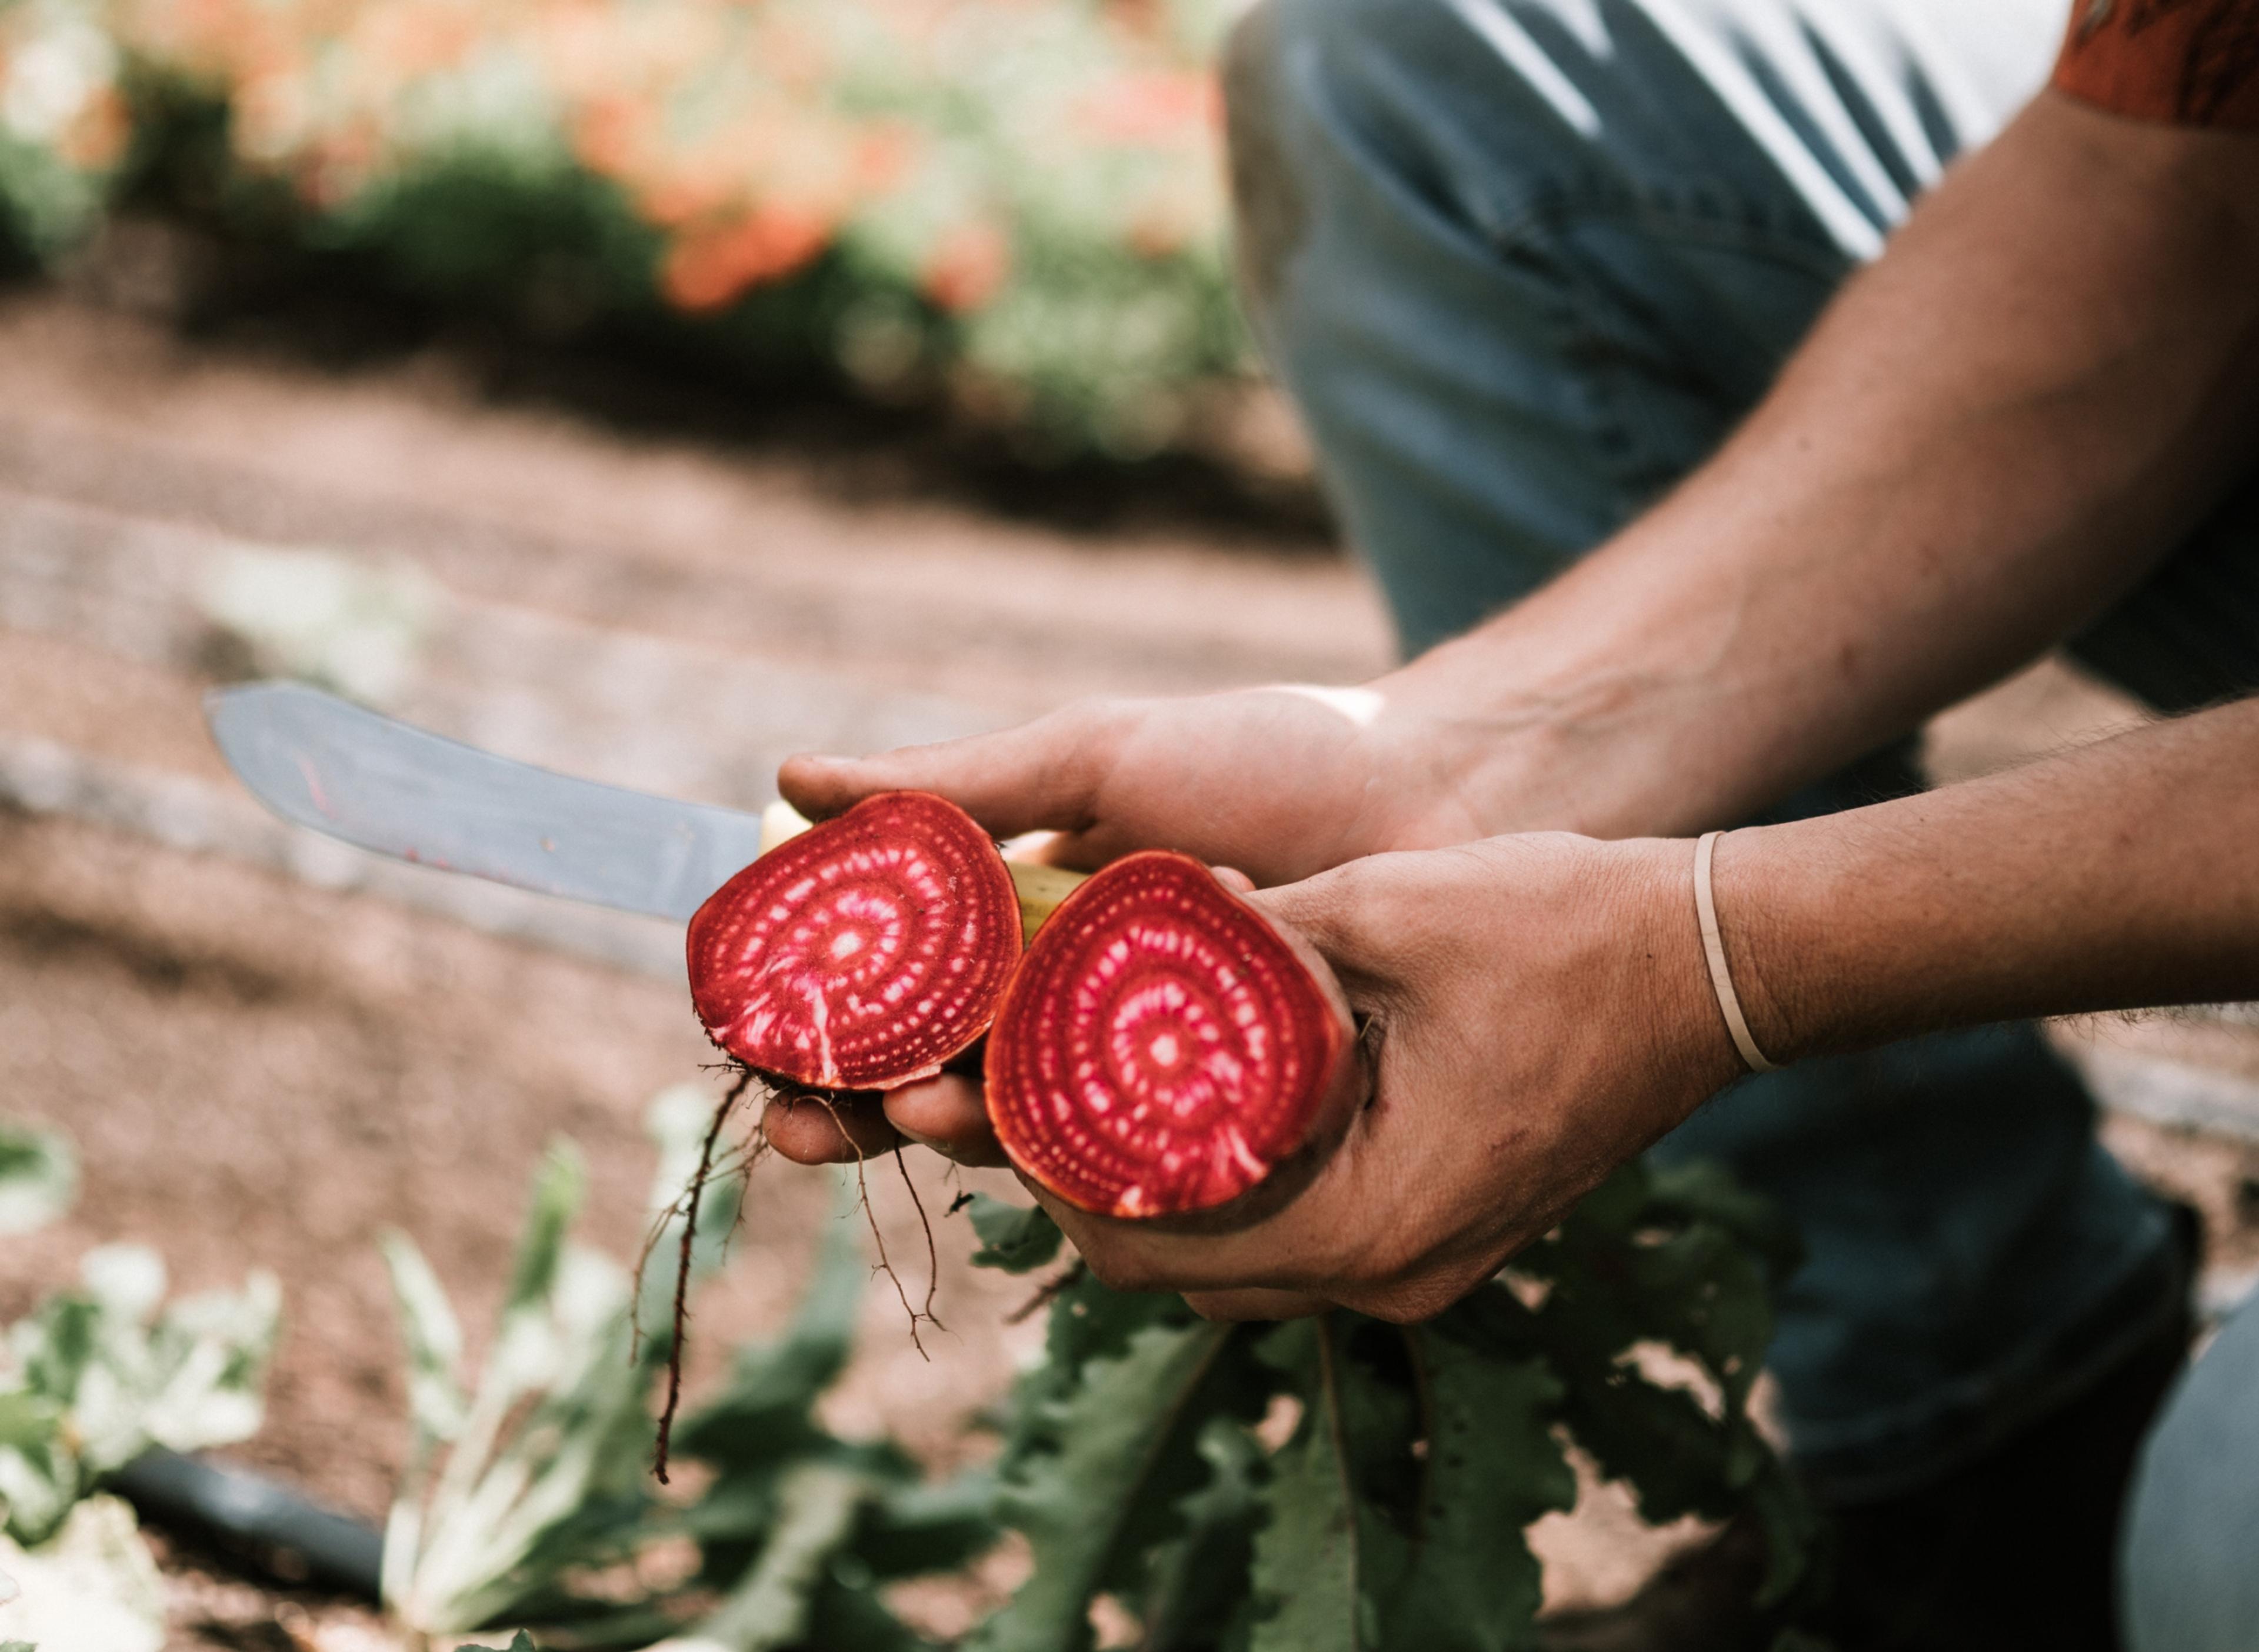 A person holding a knife and beetroot cut in half on a farm.